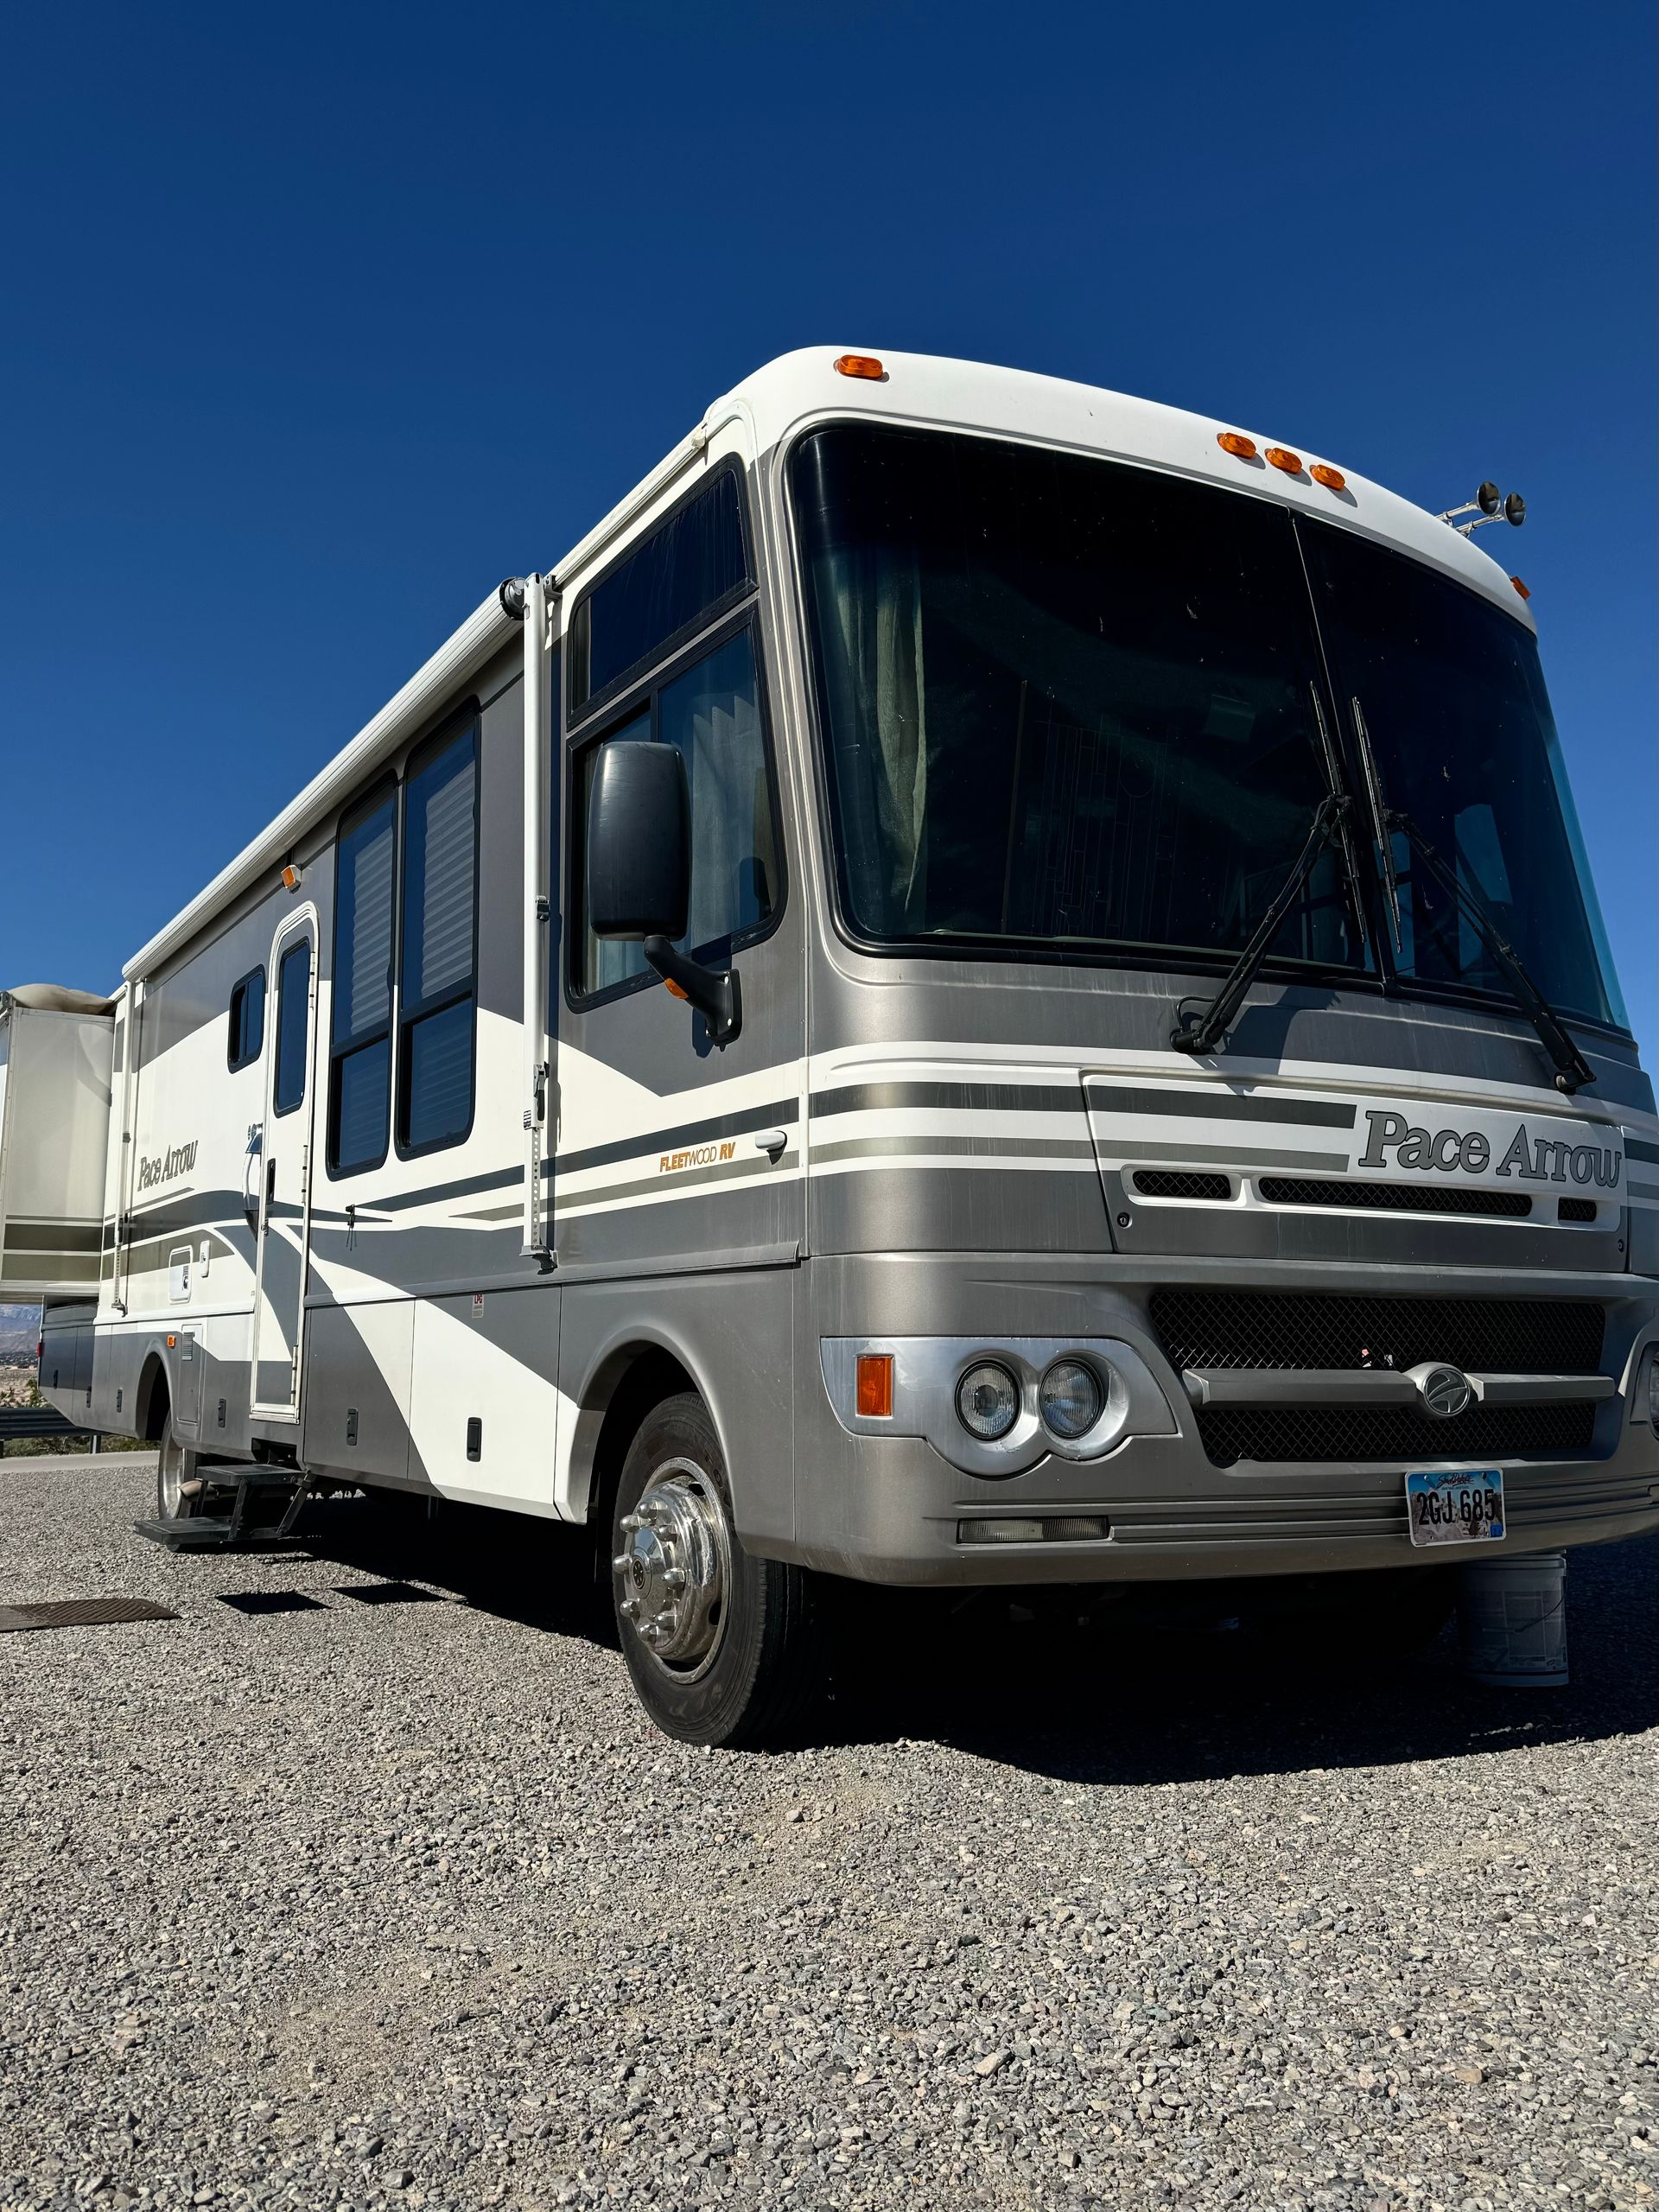 A silver and white rv is parked in a gravel lot.